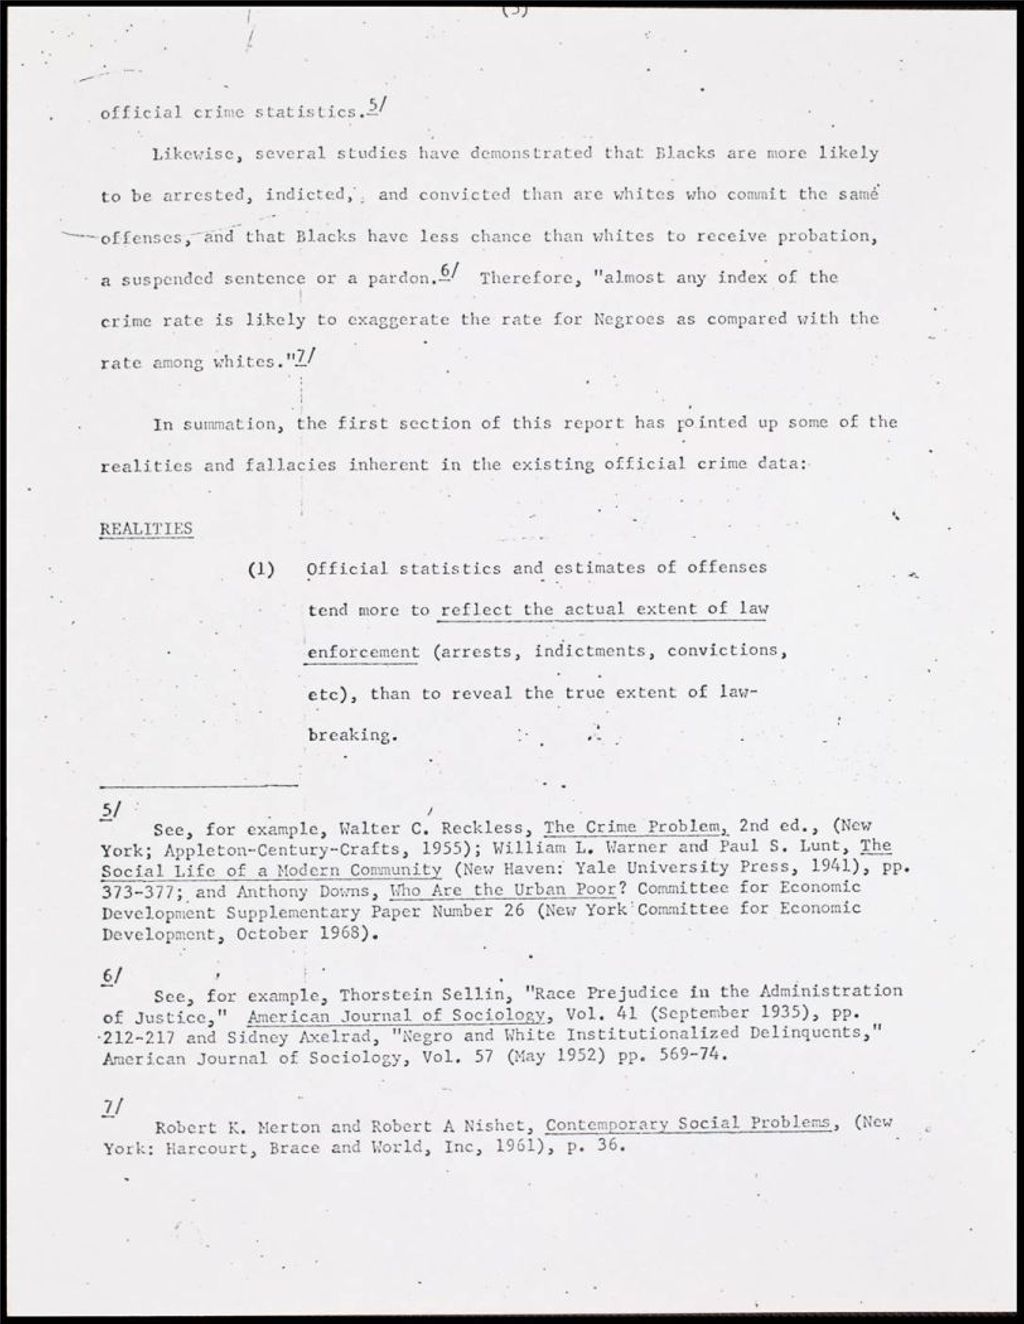 Miniature of Realities and Fallacies in Crime Law Enforcement Differentials for the Black and the Poor, 1969 (Folder III-1860)